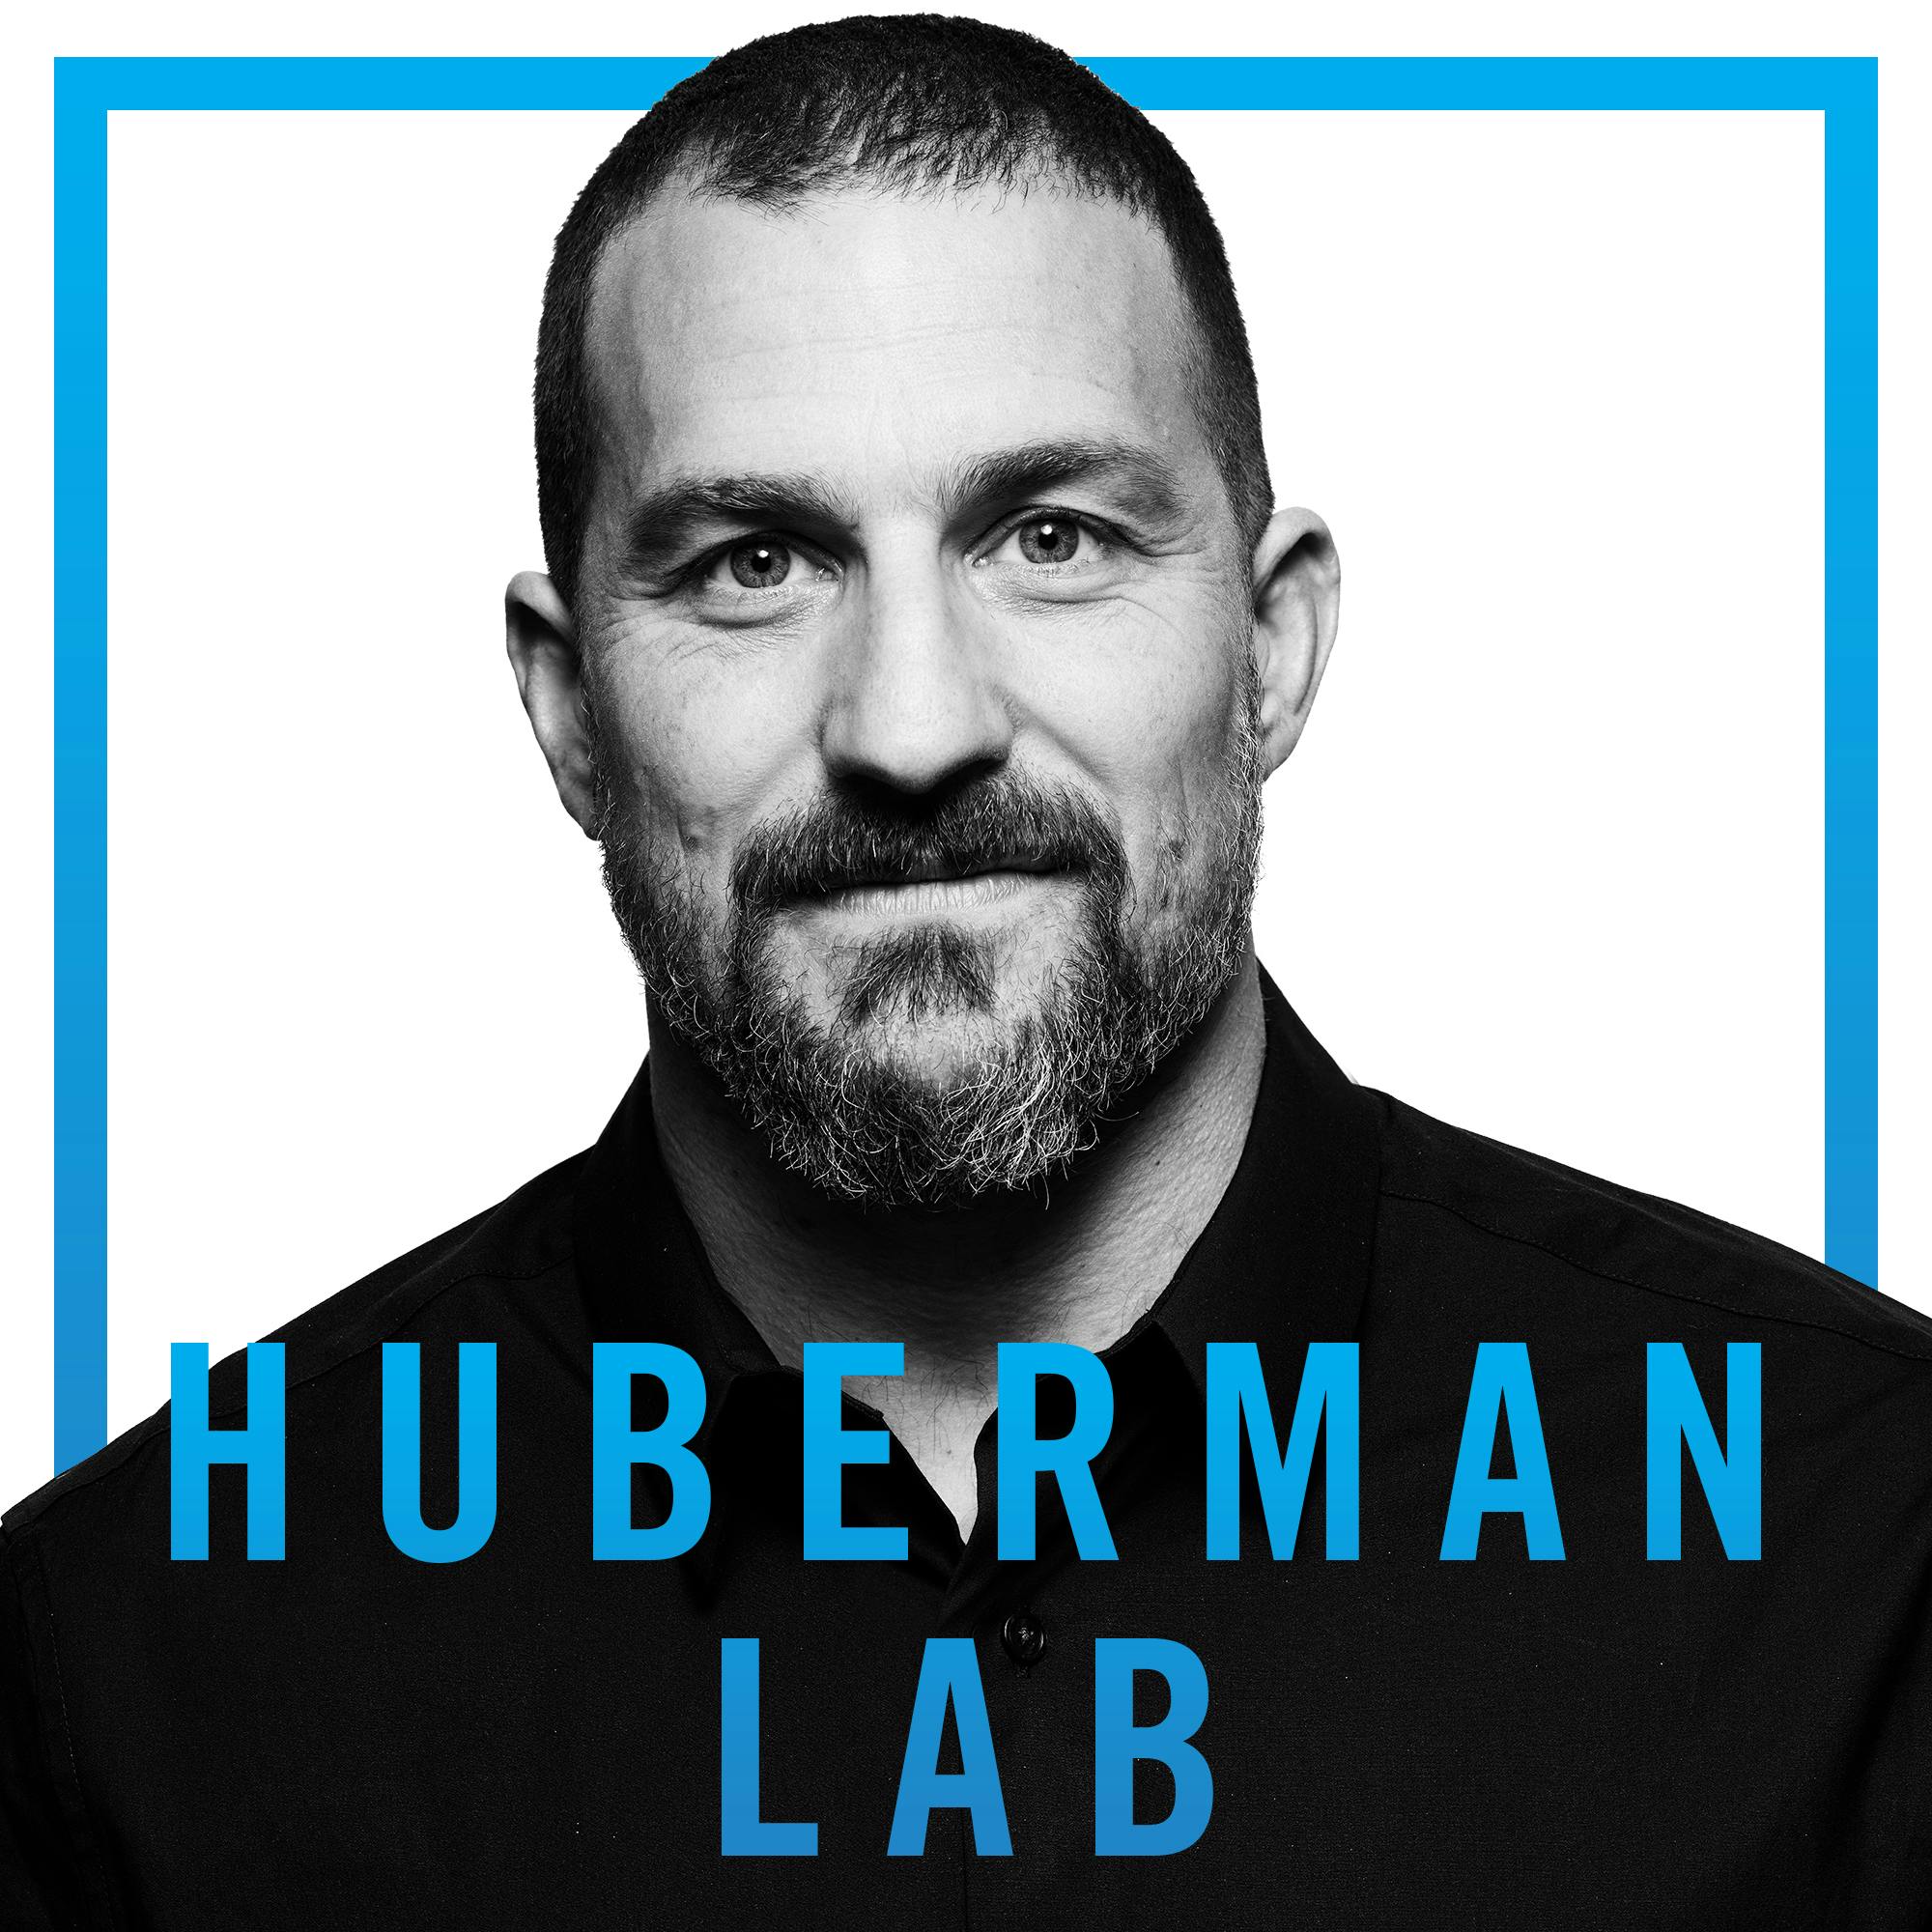 Welcome to the Huberman Lab Podcast by Scicomm Media